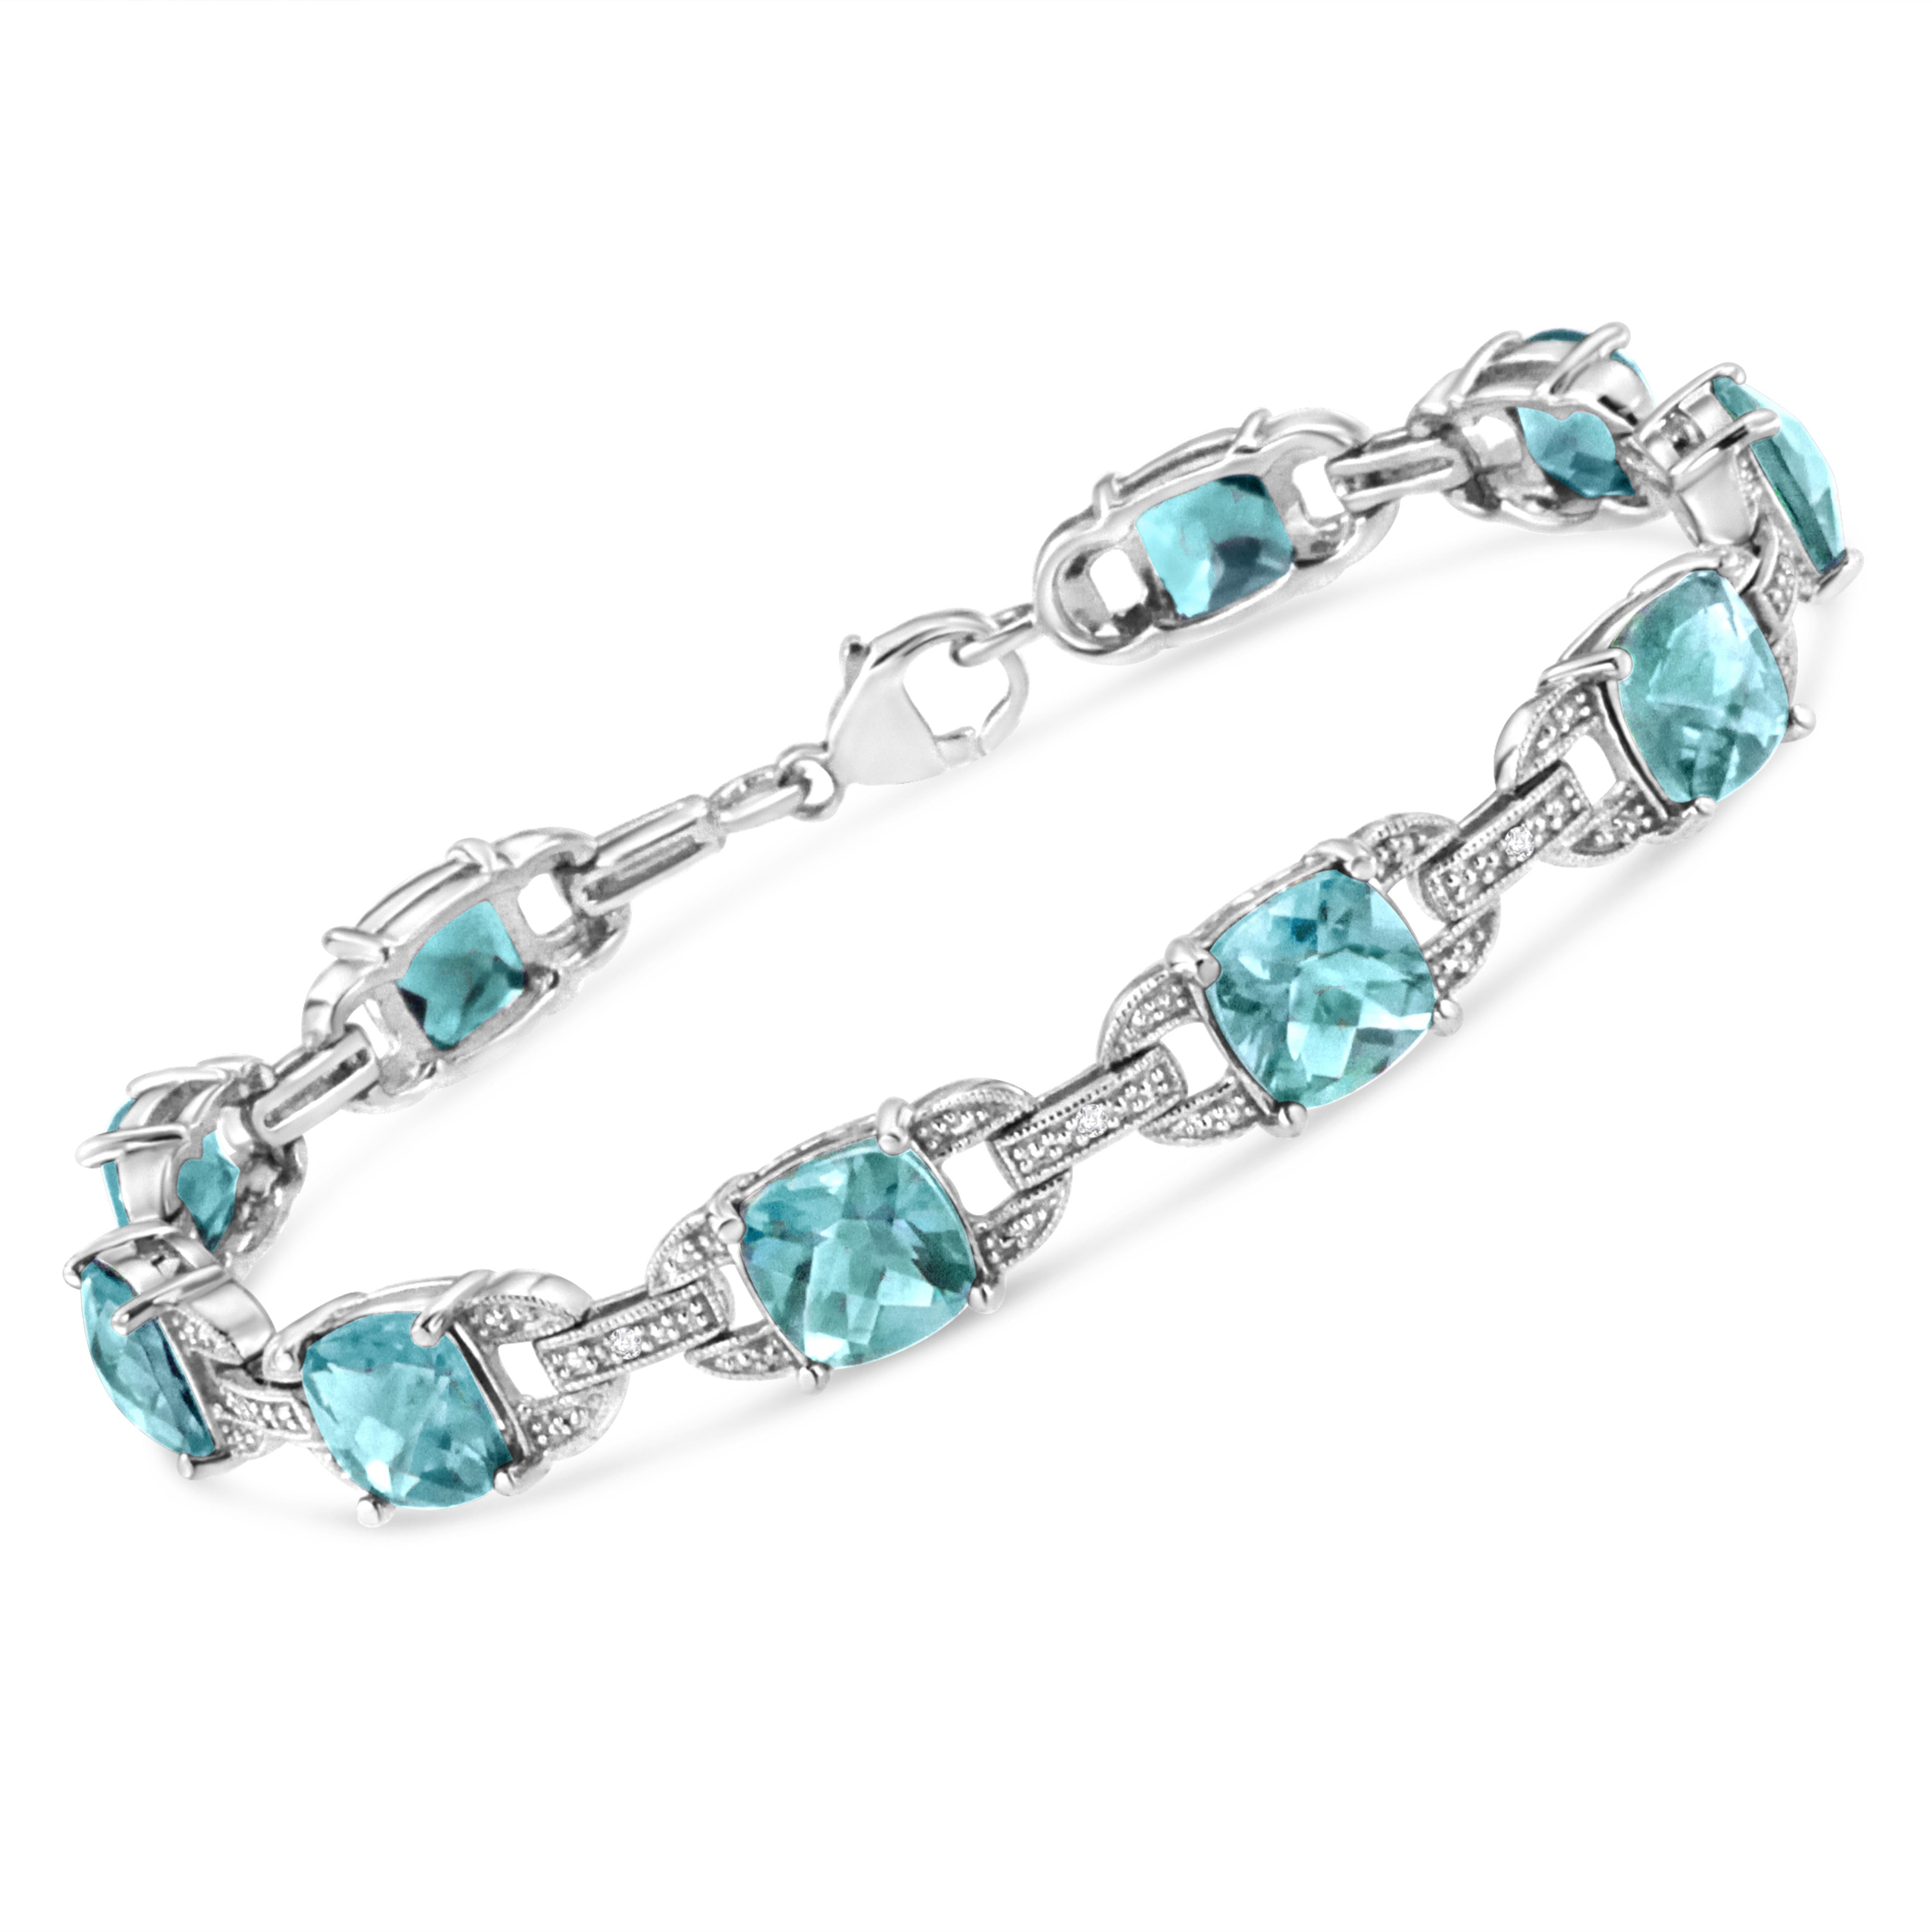 Classy and feminine, this blue topaz and diamond tennis bracelet is designed especially for your lady love. Styled in remarkable sterling silver this bracelet is embellished with 10 alluring prong set cushion cut blue topaz accentuated by 10